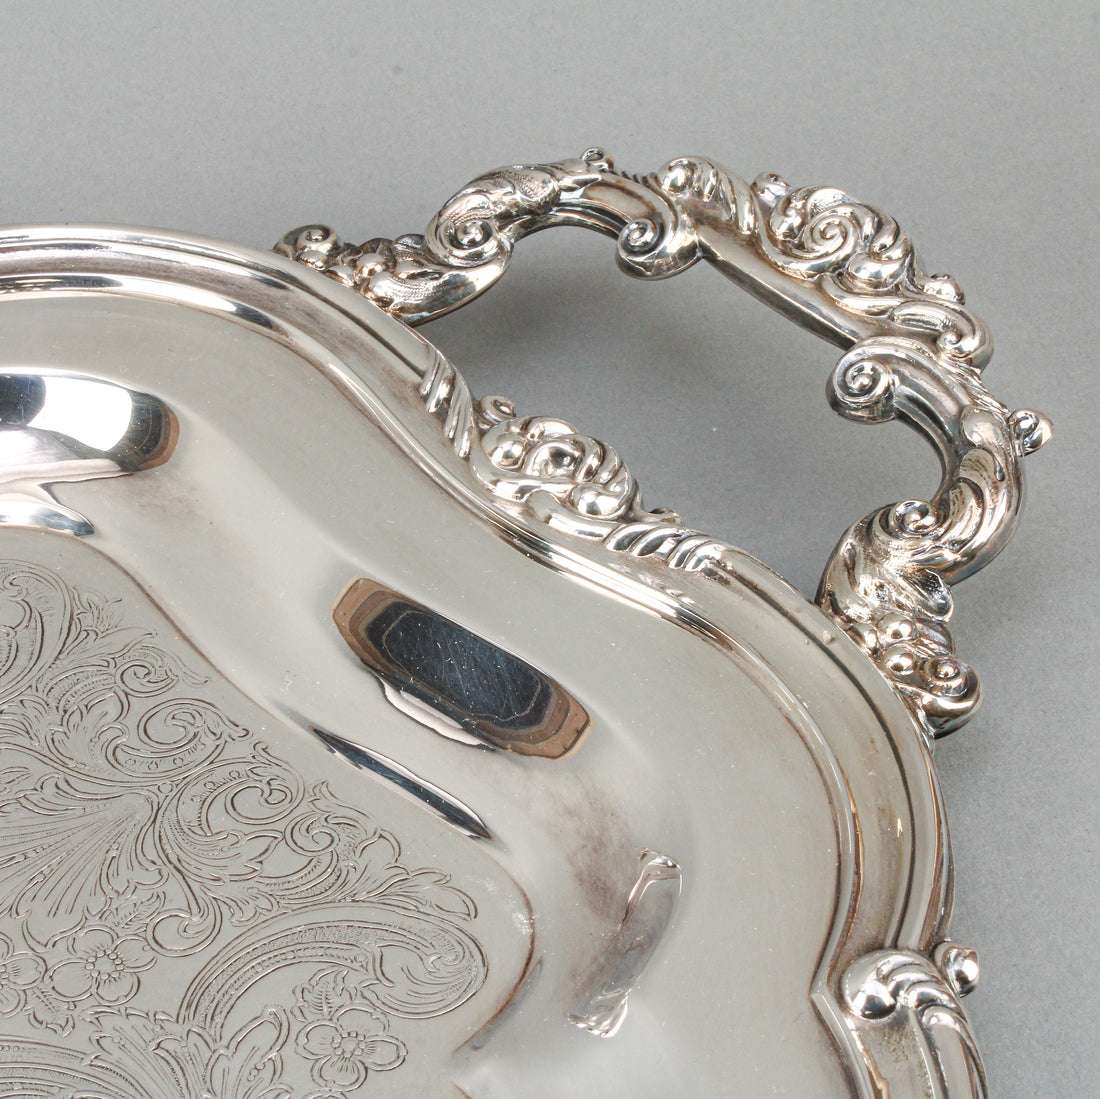 1881 ROGERS Silverplate Tray 7597